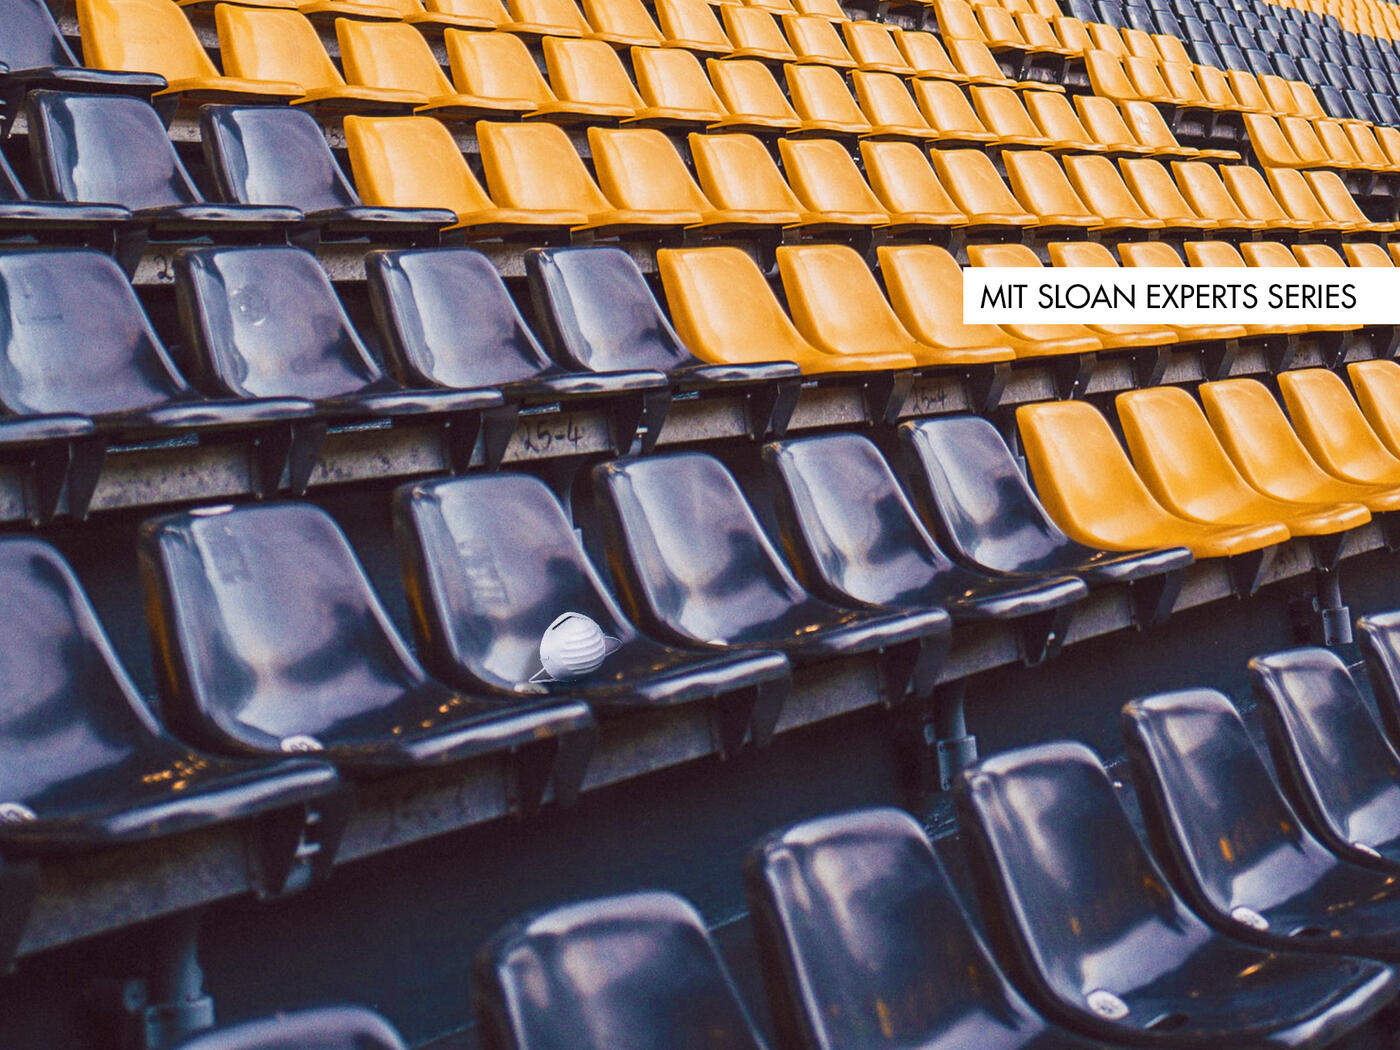 Photograph of empty stadium seats. One seat has a face mask on it.